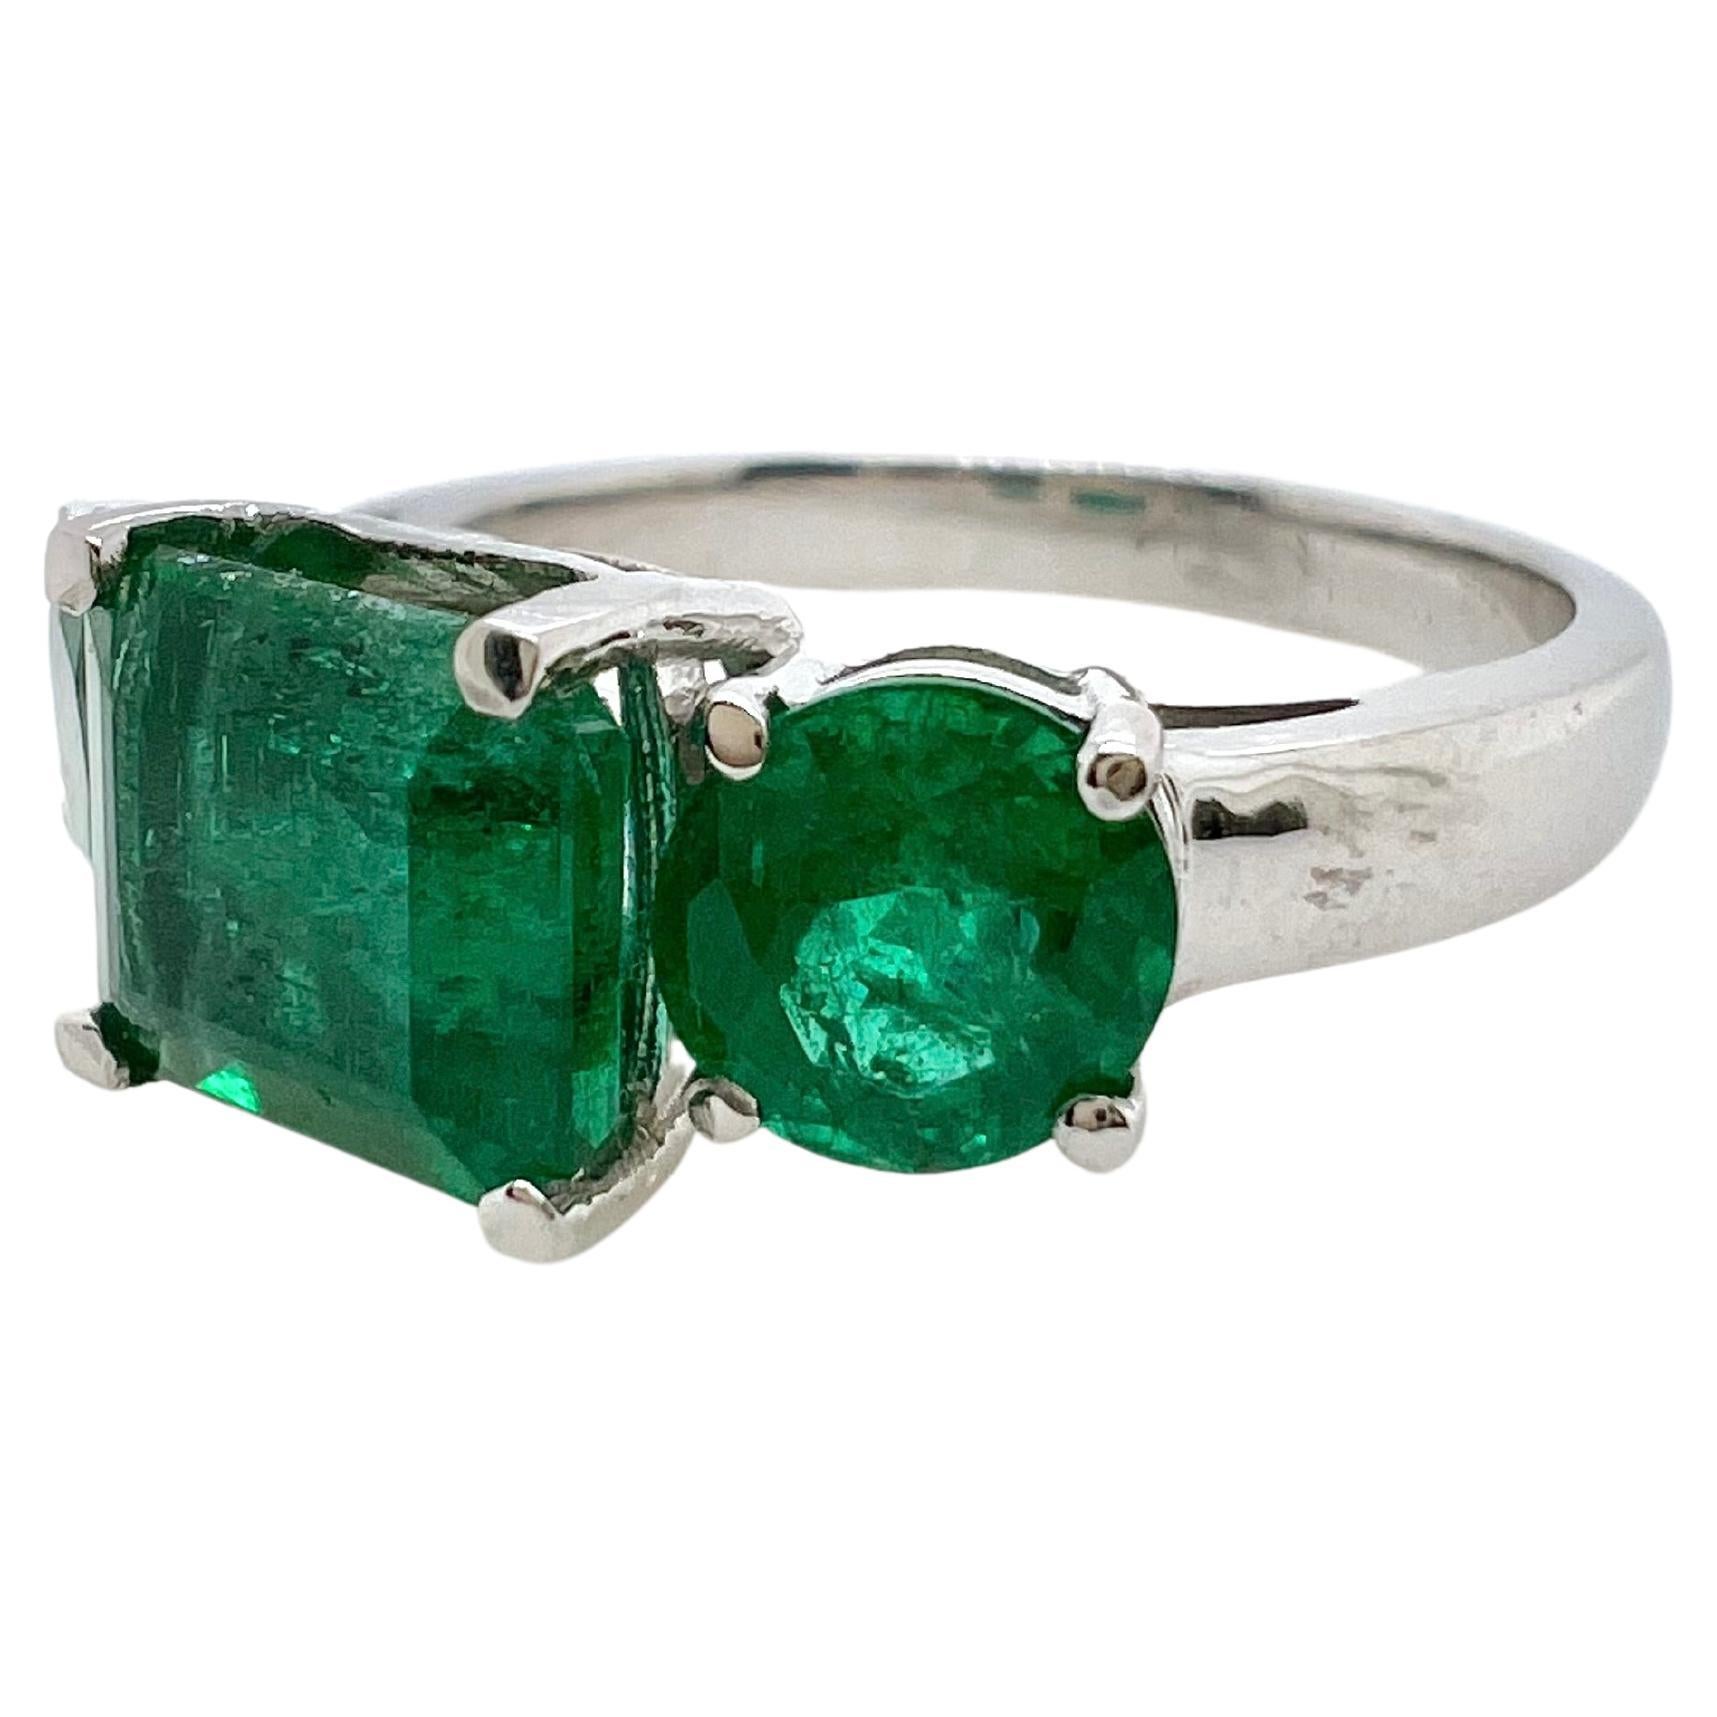 This unique three stone ring will grasp everyone's attention!  The round cut emerald accompany the center emerald cut emerald to give a true, emerald green ring. 


Size: 6.75 (can be size)
Emerald: 1.97 cts, Emerald Cut
Emeralds: 1.44 cts, Round